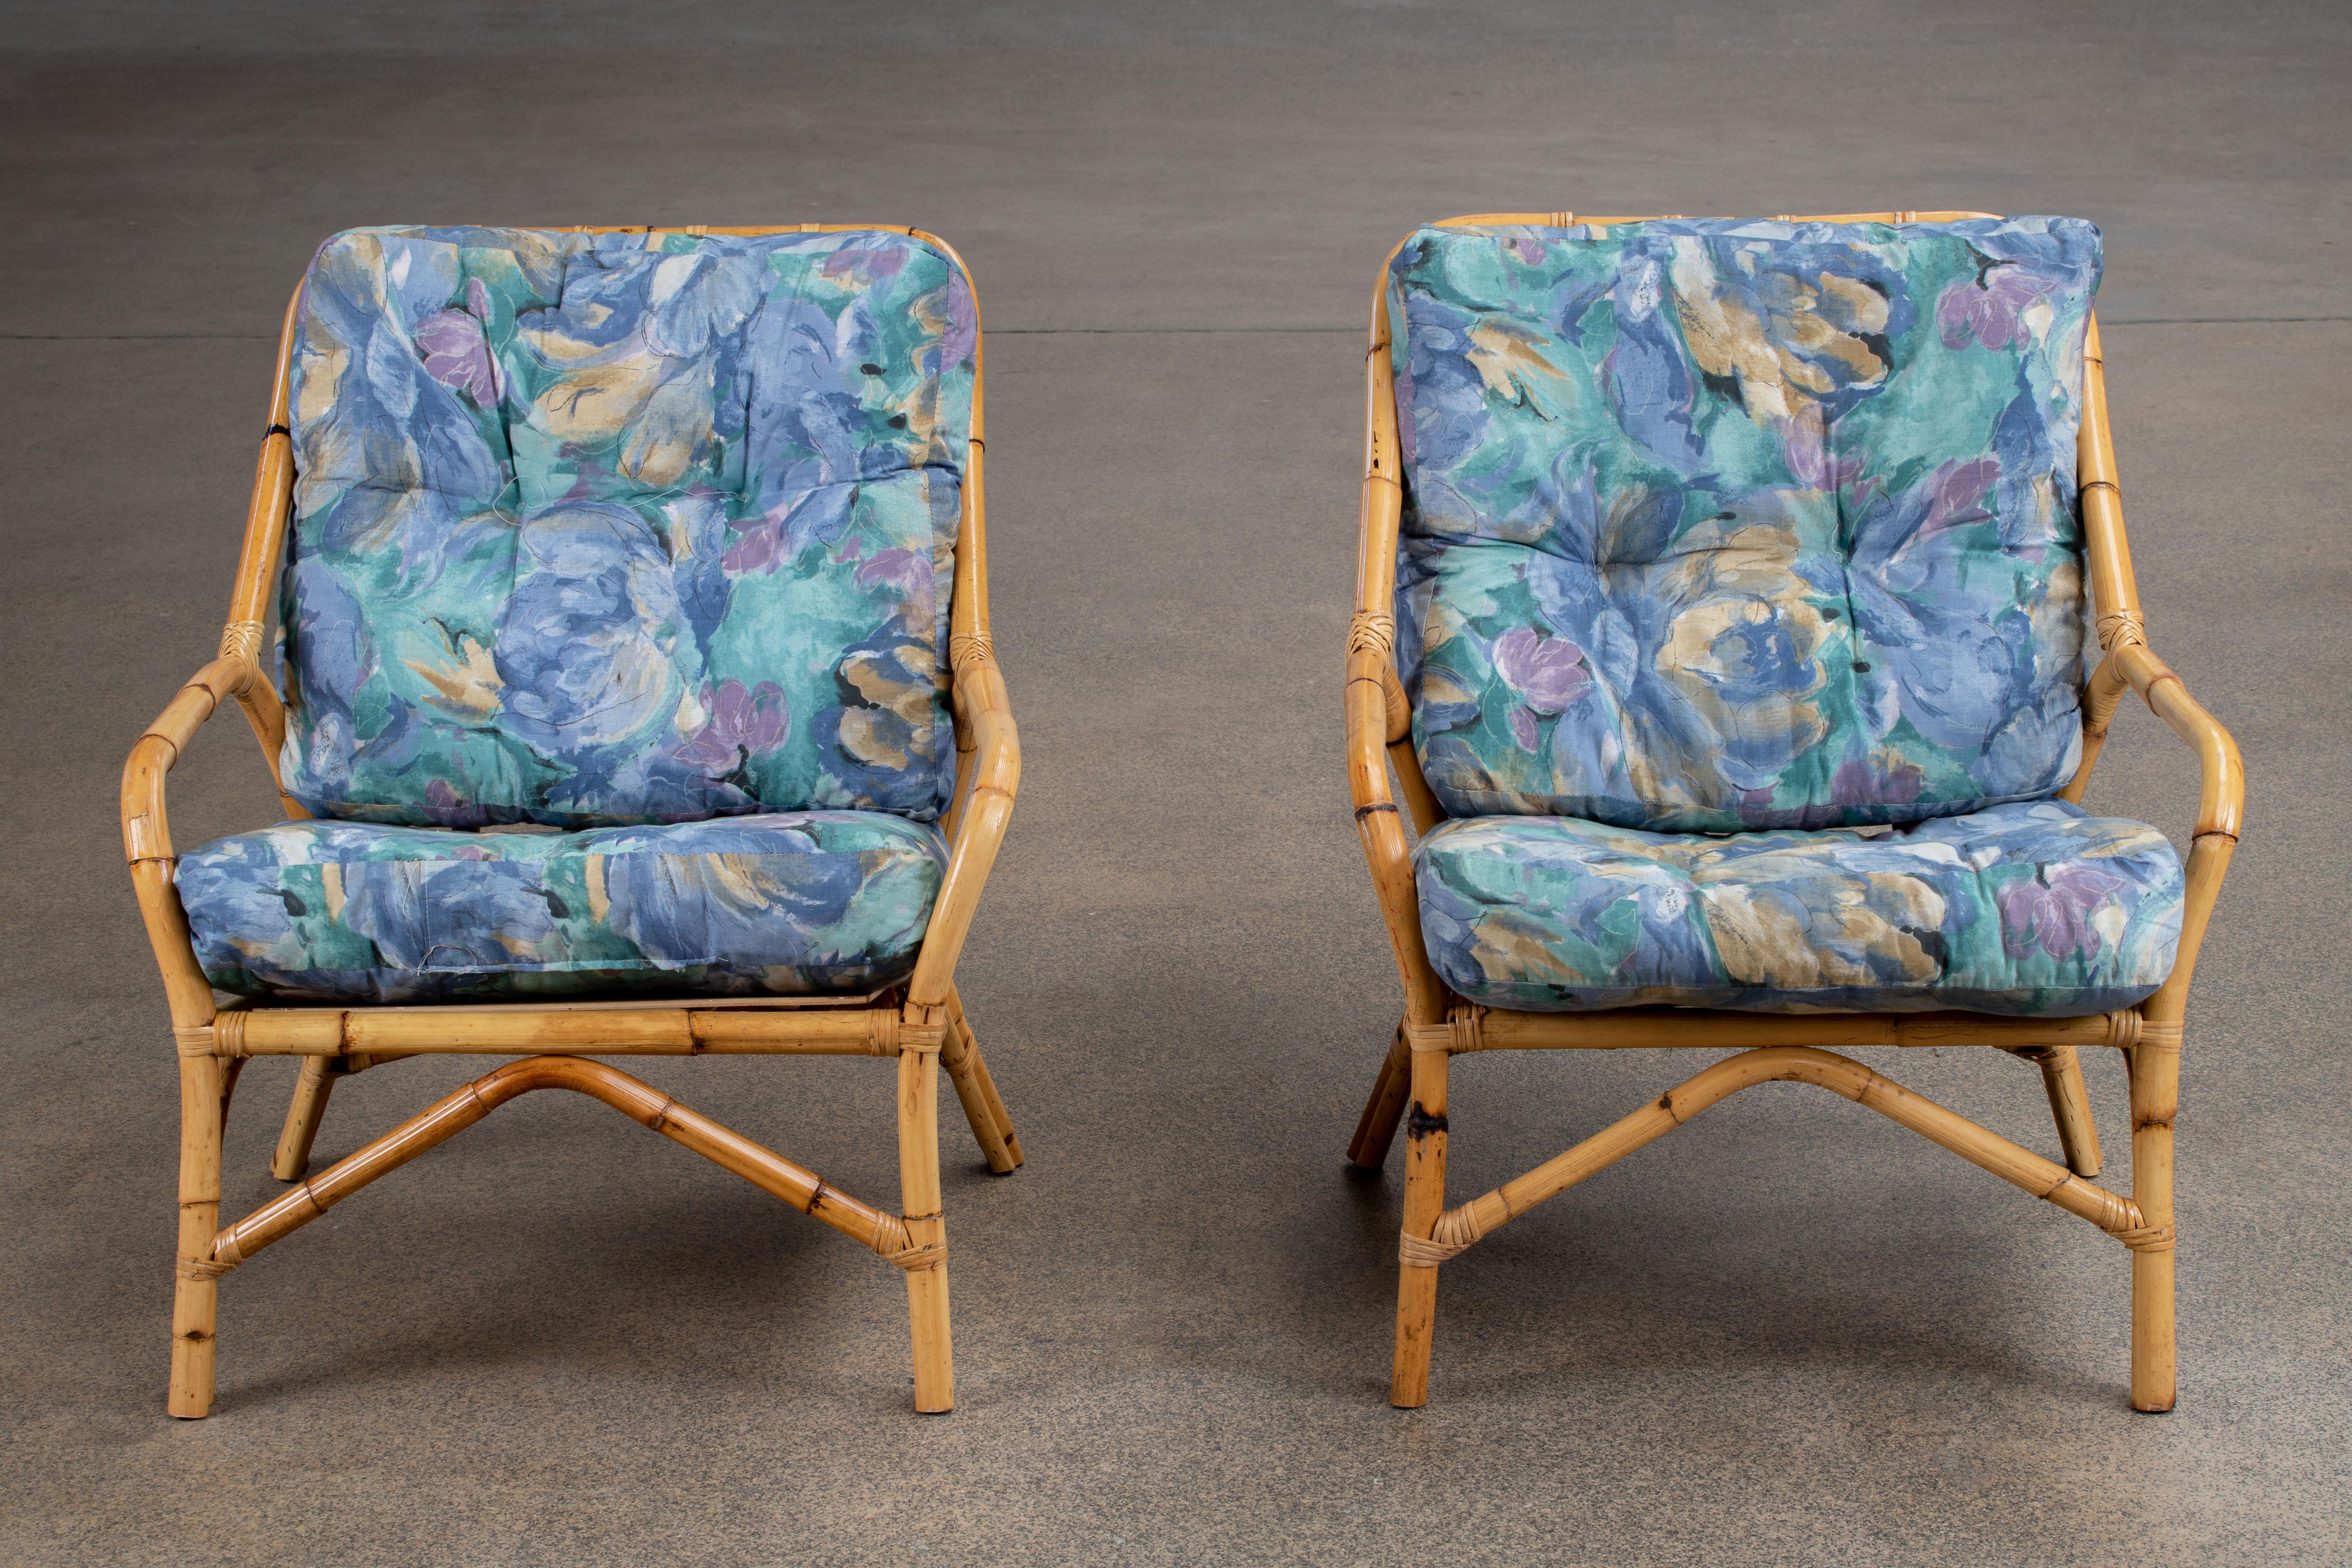 Gorgeous pair of 1970s oversized bamboo rattan lounge chairs made in the French Riviera organic modern style. The chairs feature a large bent rattan frame fitted with Silky blue cushions. Very comfortable with excellent joinery and craftsmanship.